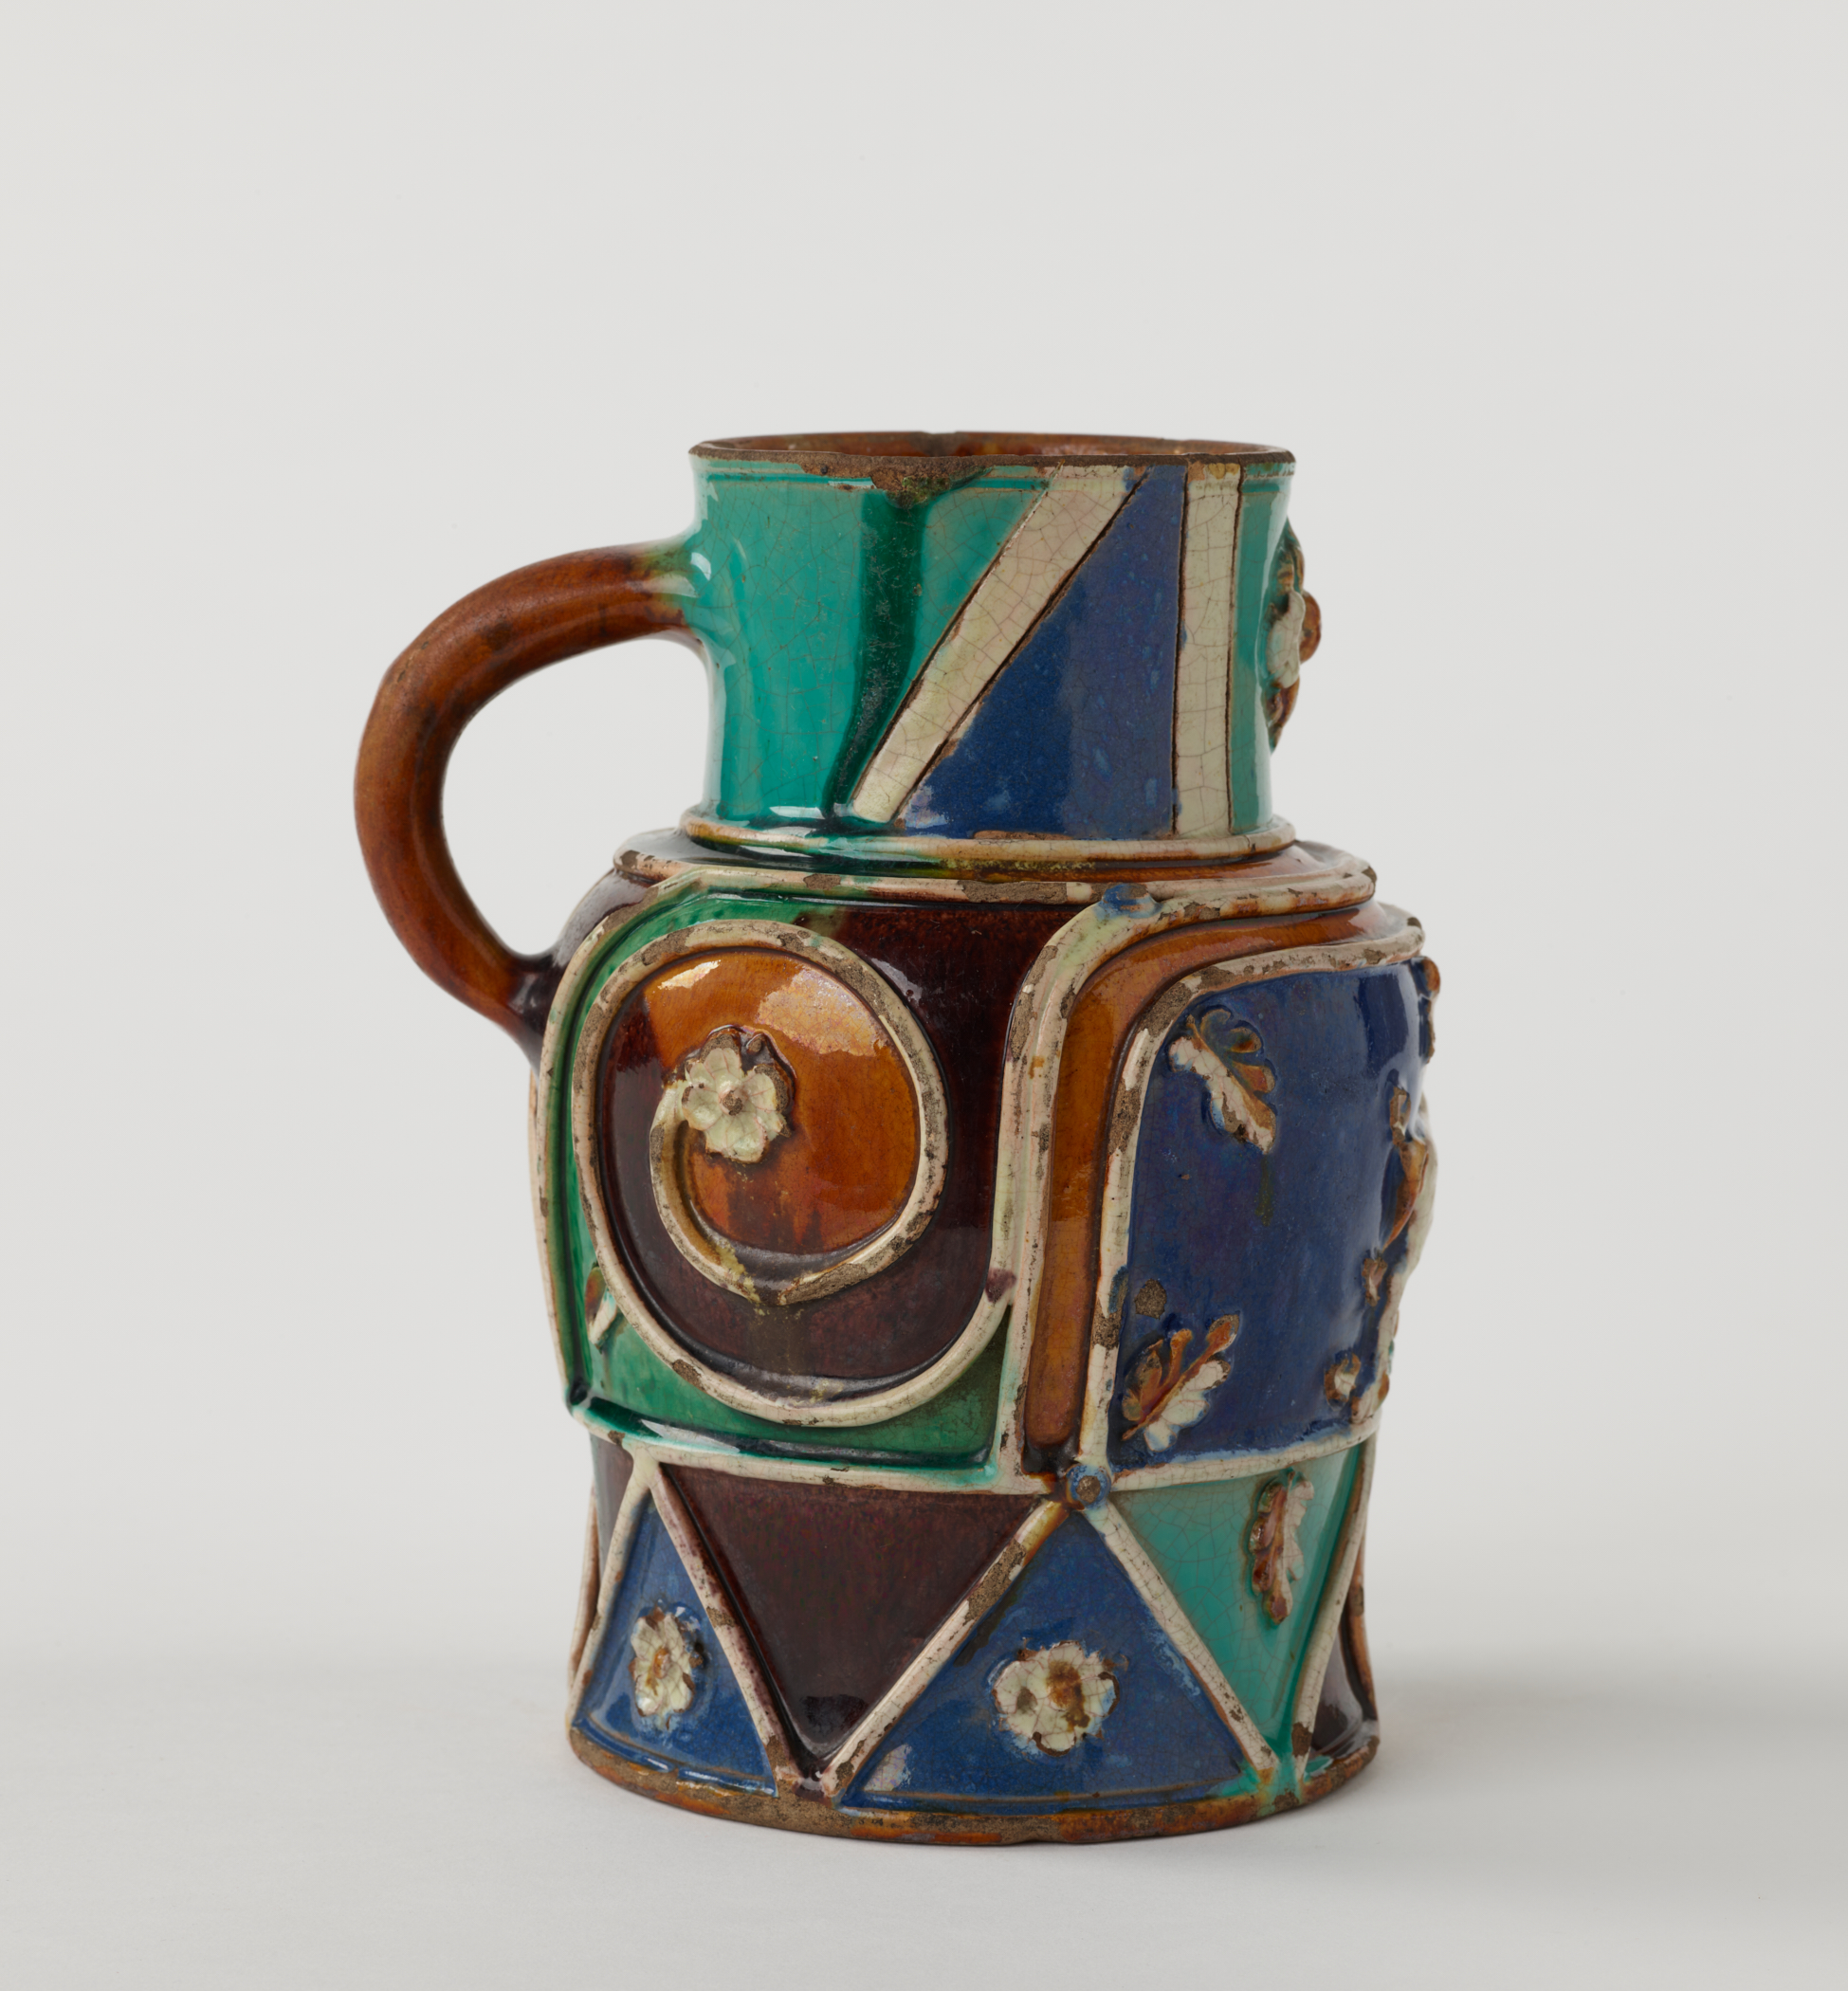 /A%20lead-glazed%20earthenware%20pitcher%20with%20white%2C%20blue%2C%20turquoise%2C%20orange%2C%20and%20black%20decorations.%20Some%20of%20the%20white%20decorations%20are%20raised.%20